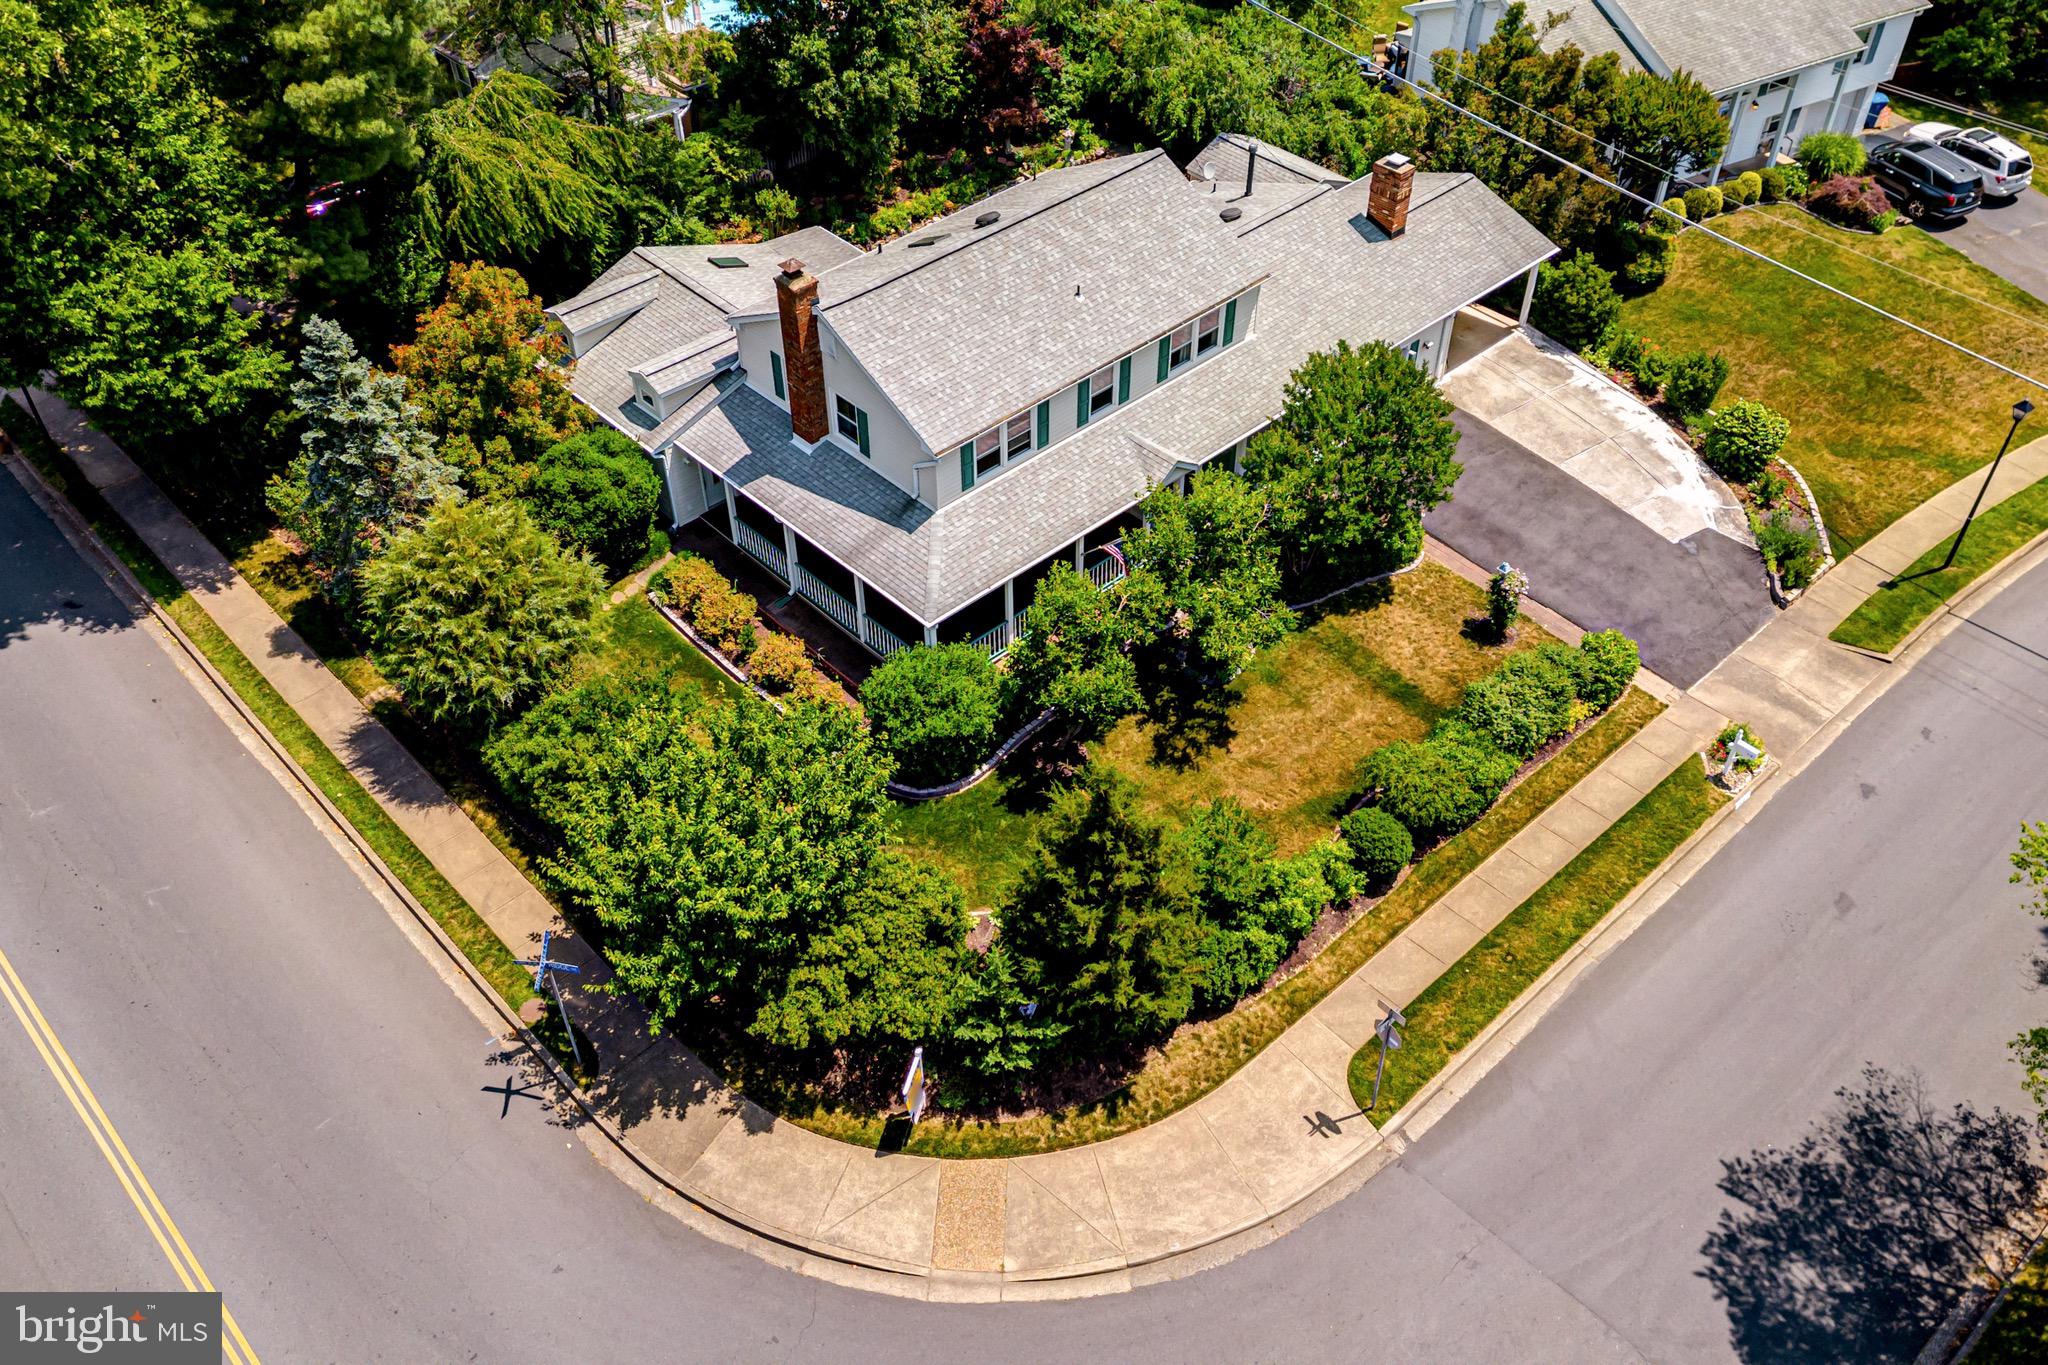 an aerial view of a house with a garden and plants